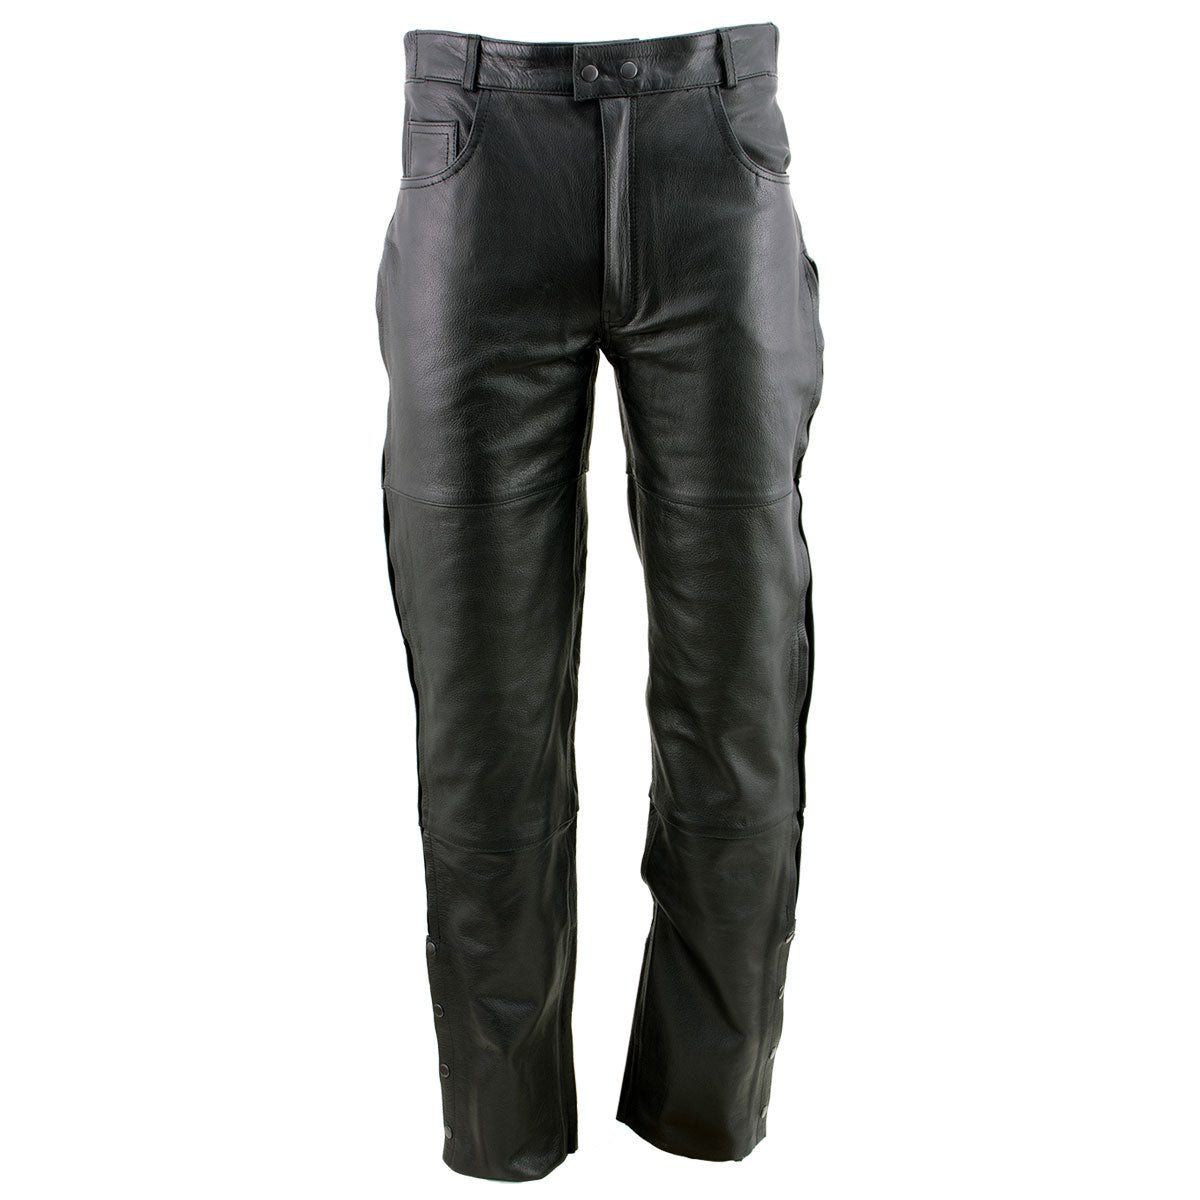 Xelement B7470 Men's Black Premium Leather Motorcycle Over Pants with ...